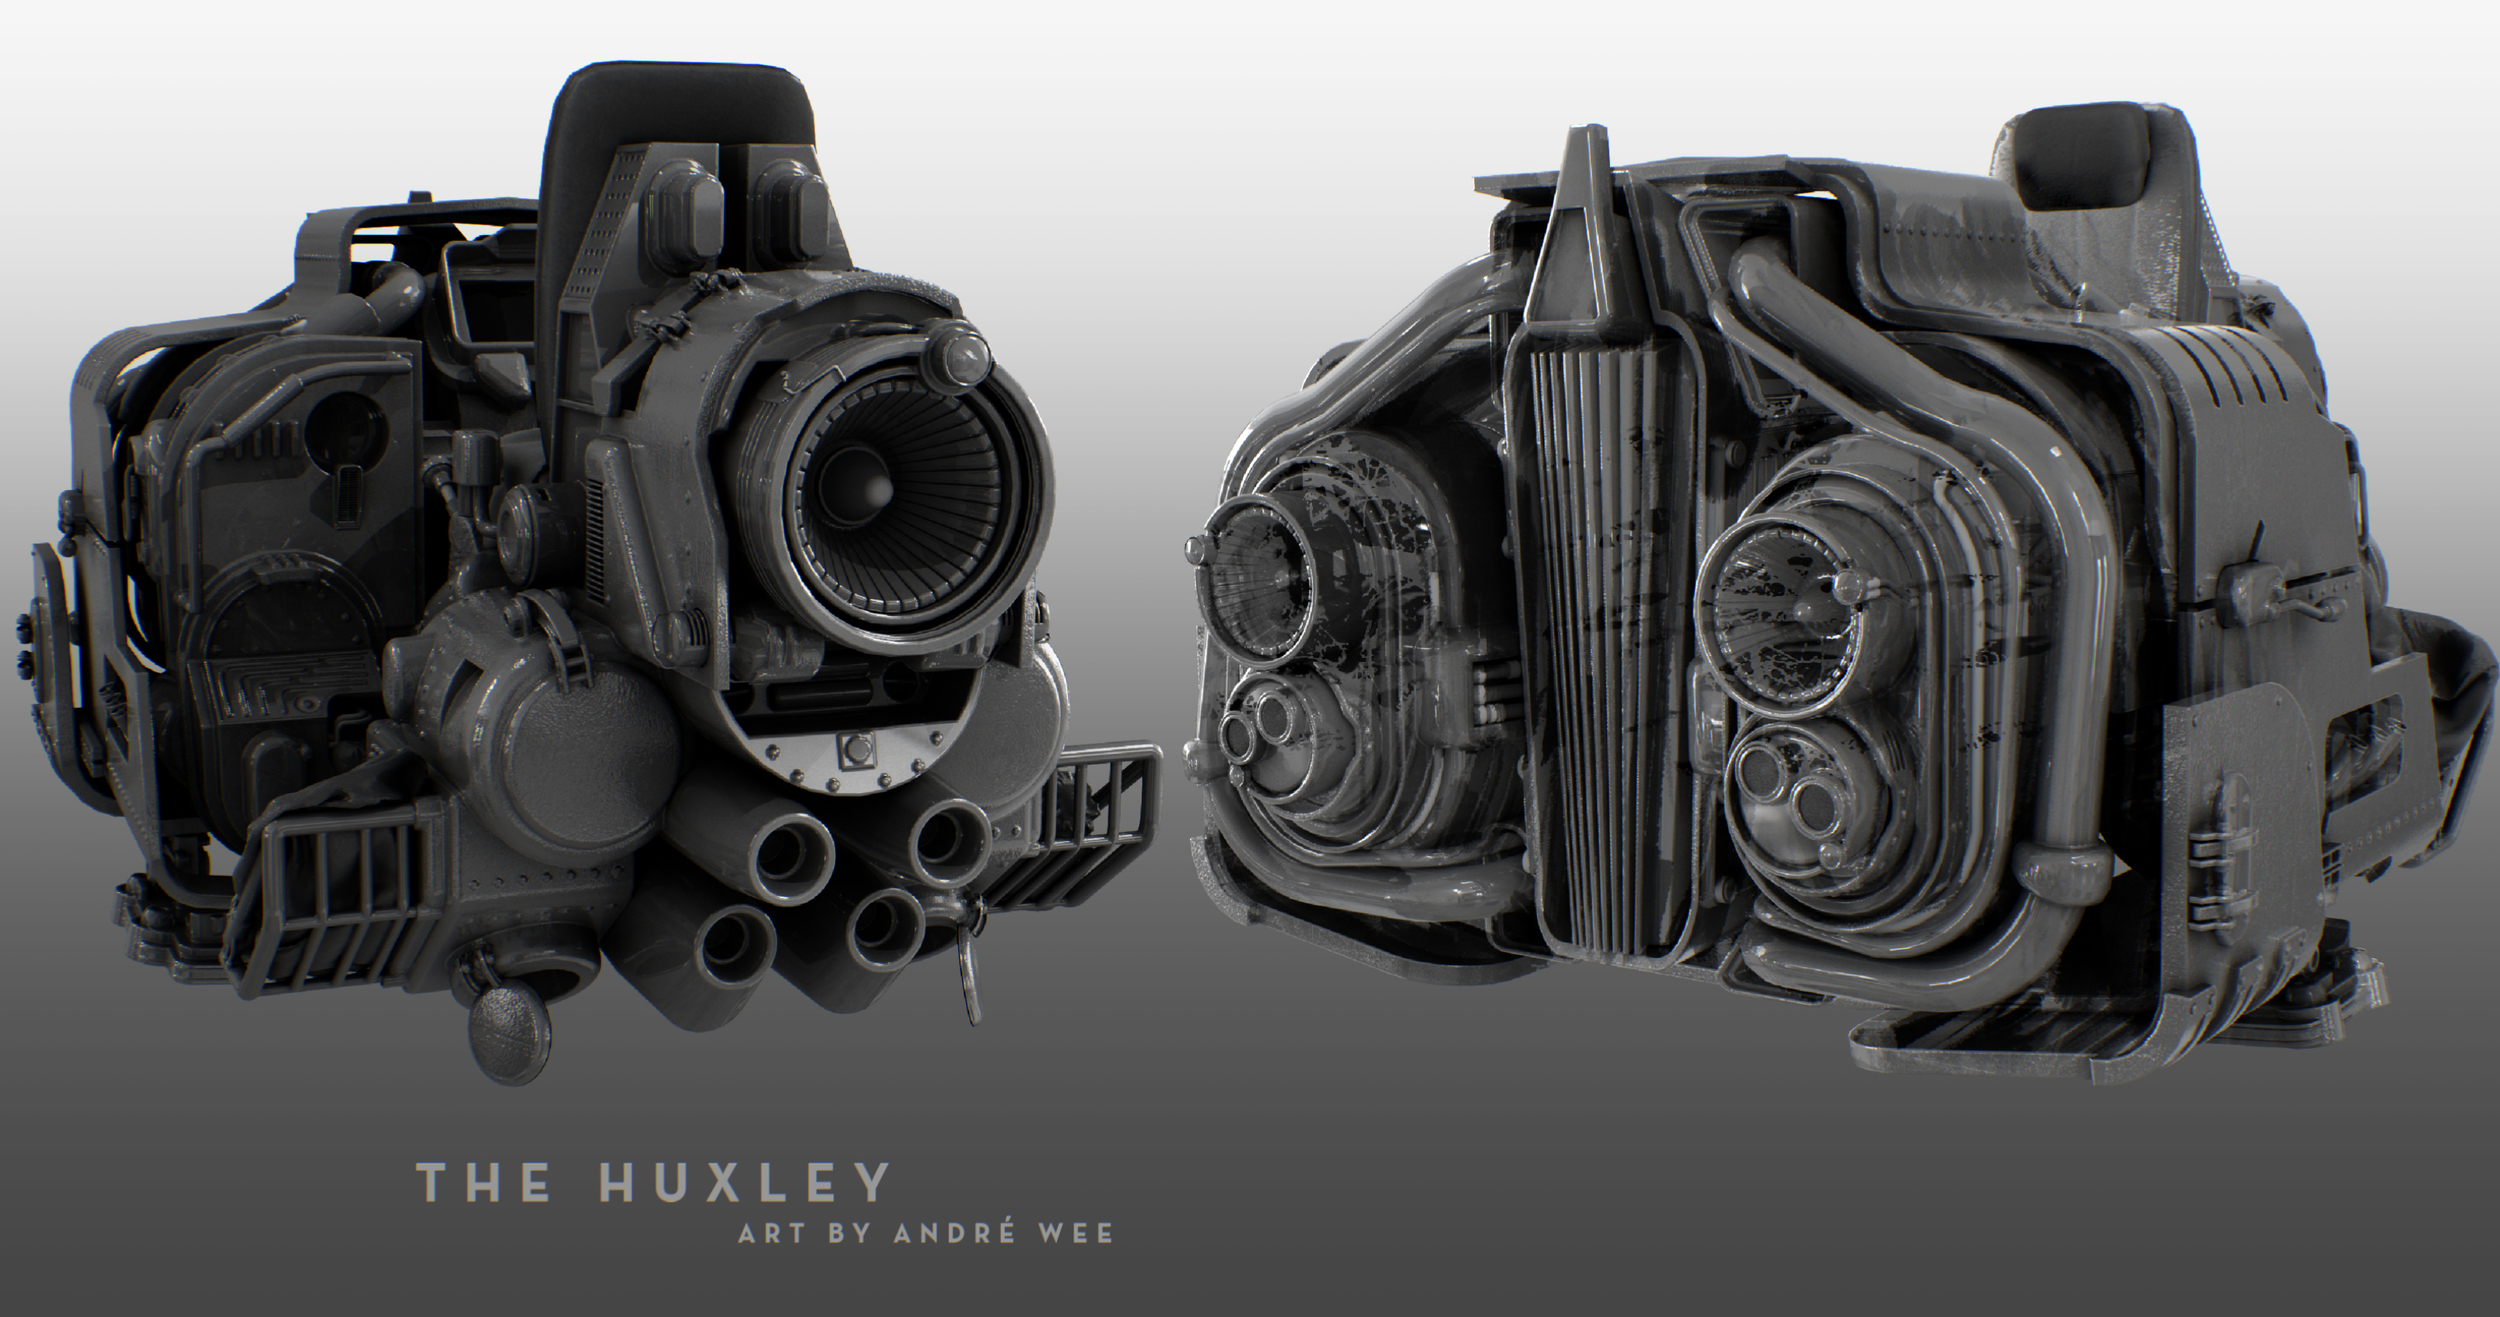 TheHuxley_01_andrewee04.jpg